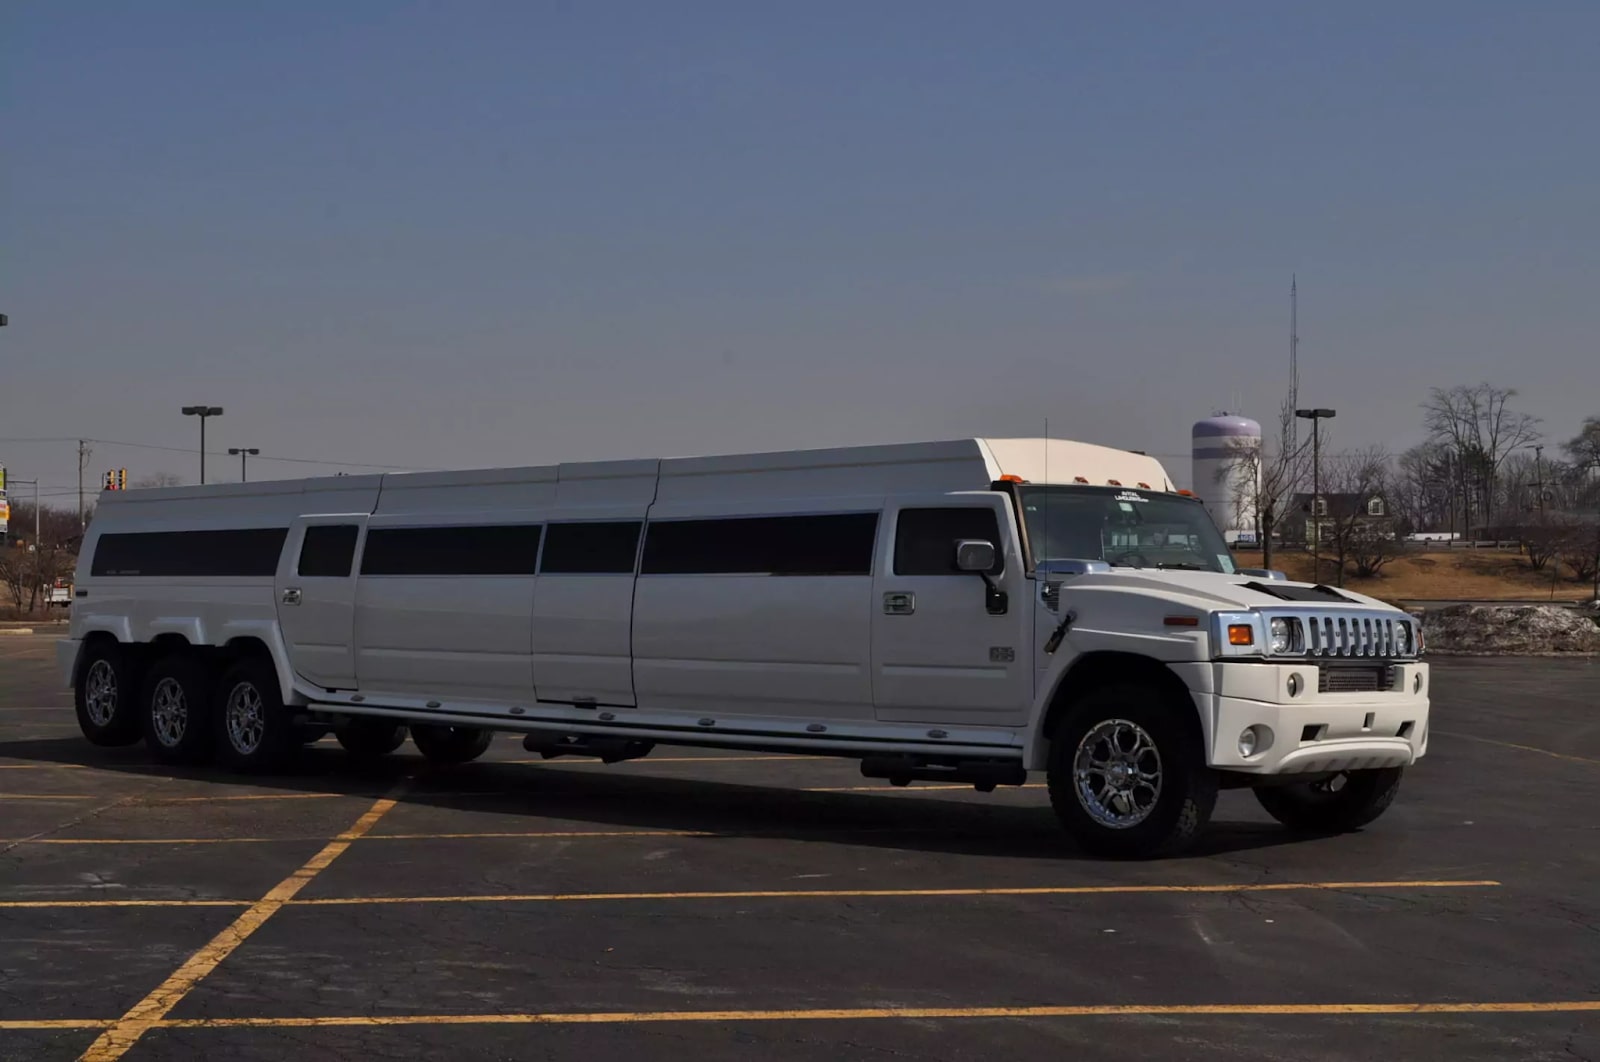 Prom limo bus